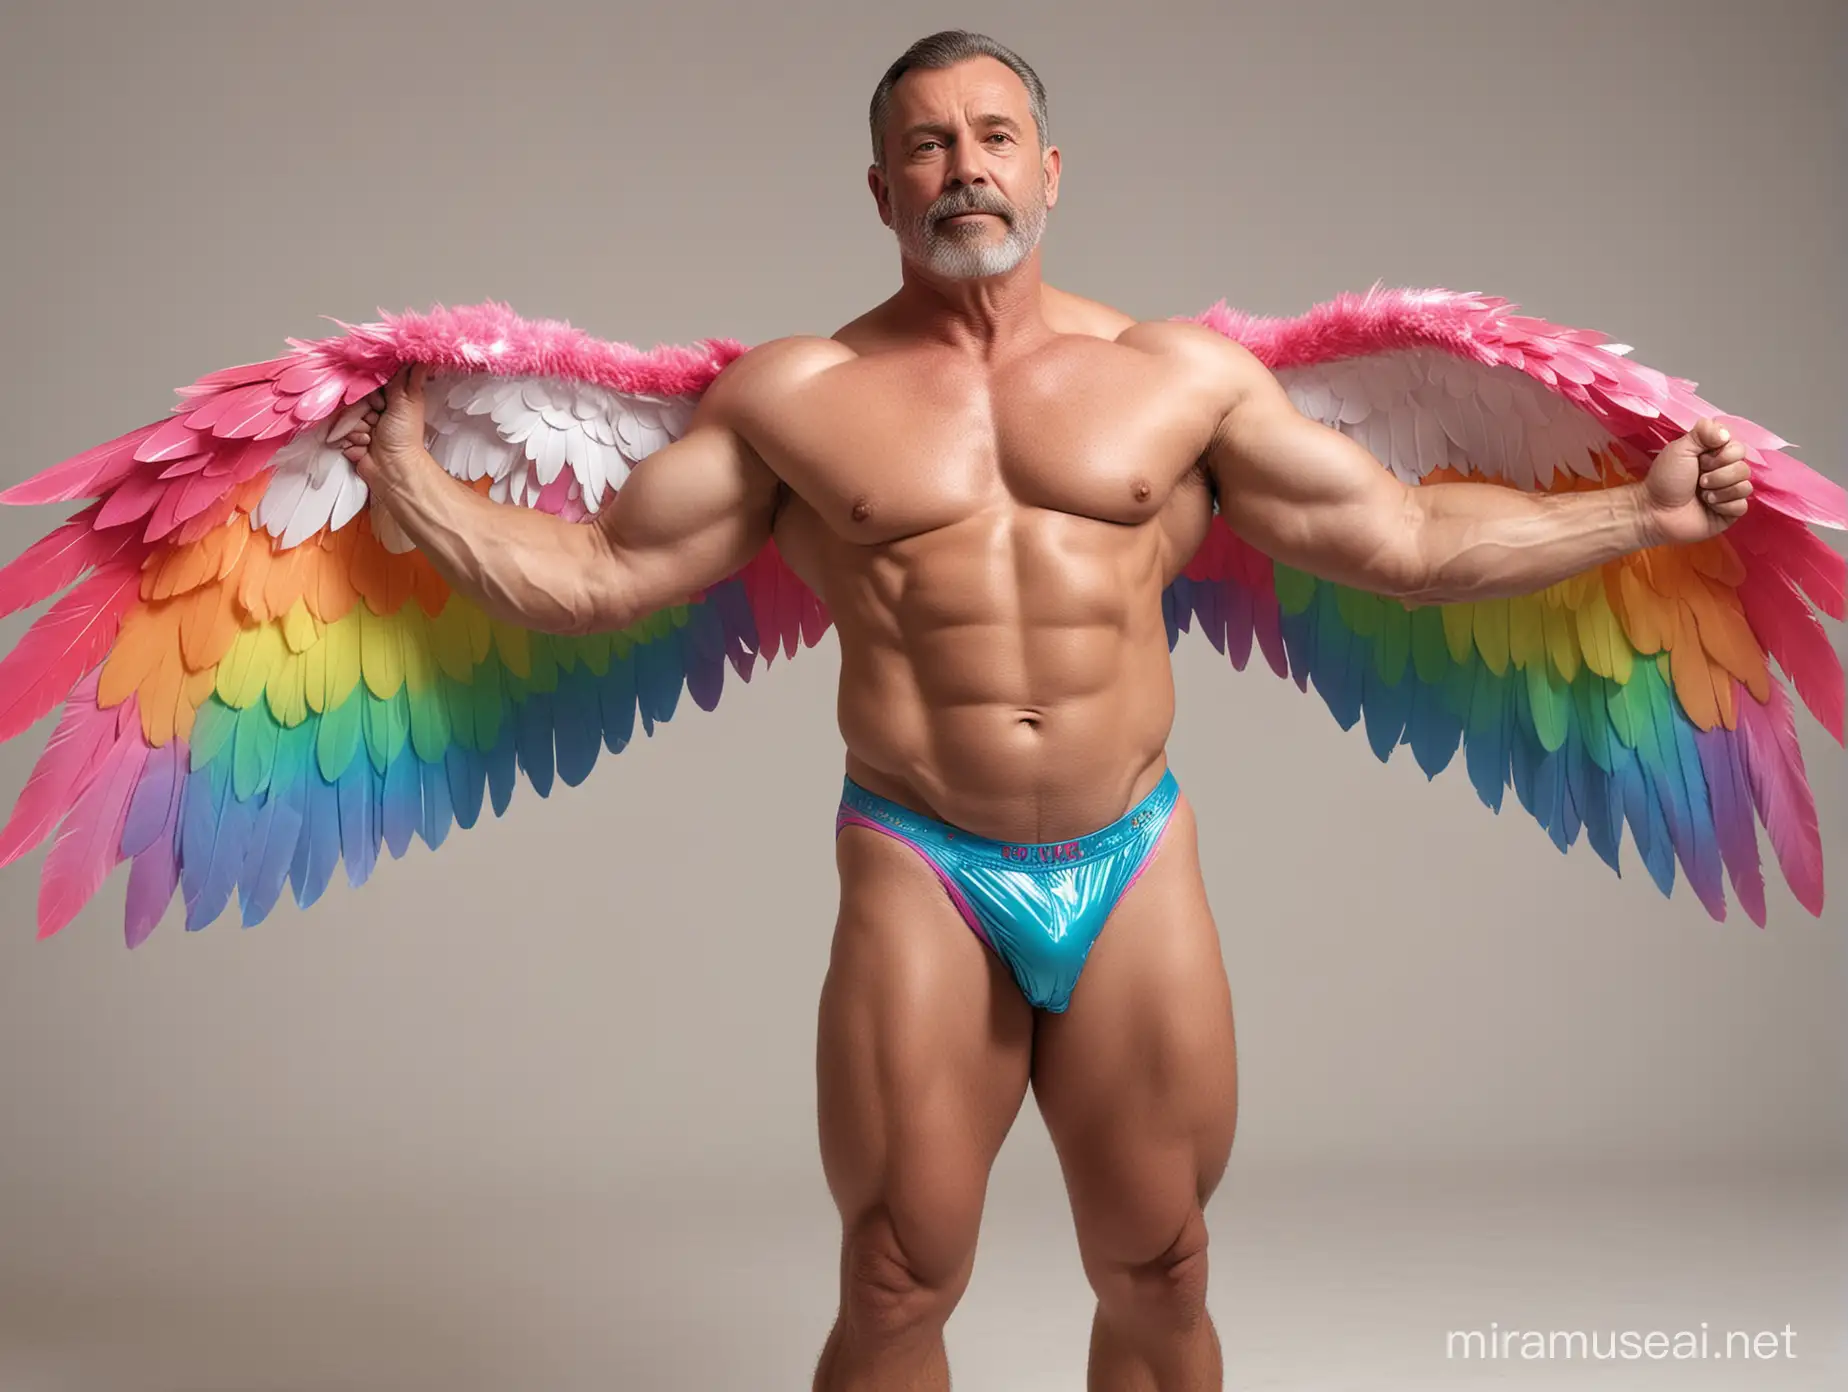 Muscular 40s Bodybuilder Flexing with Rainbow Eagle Wings Jacket